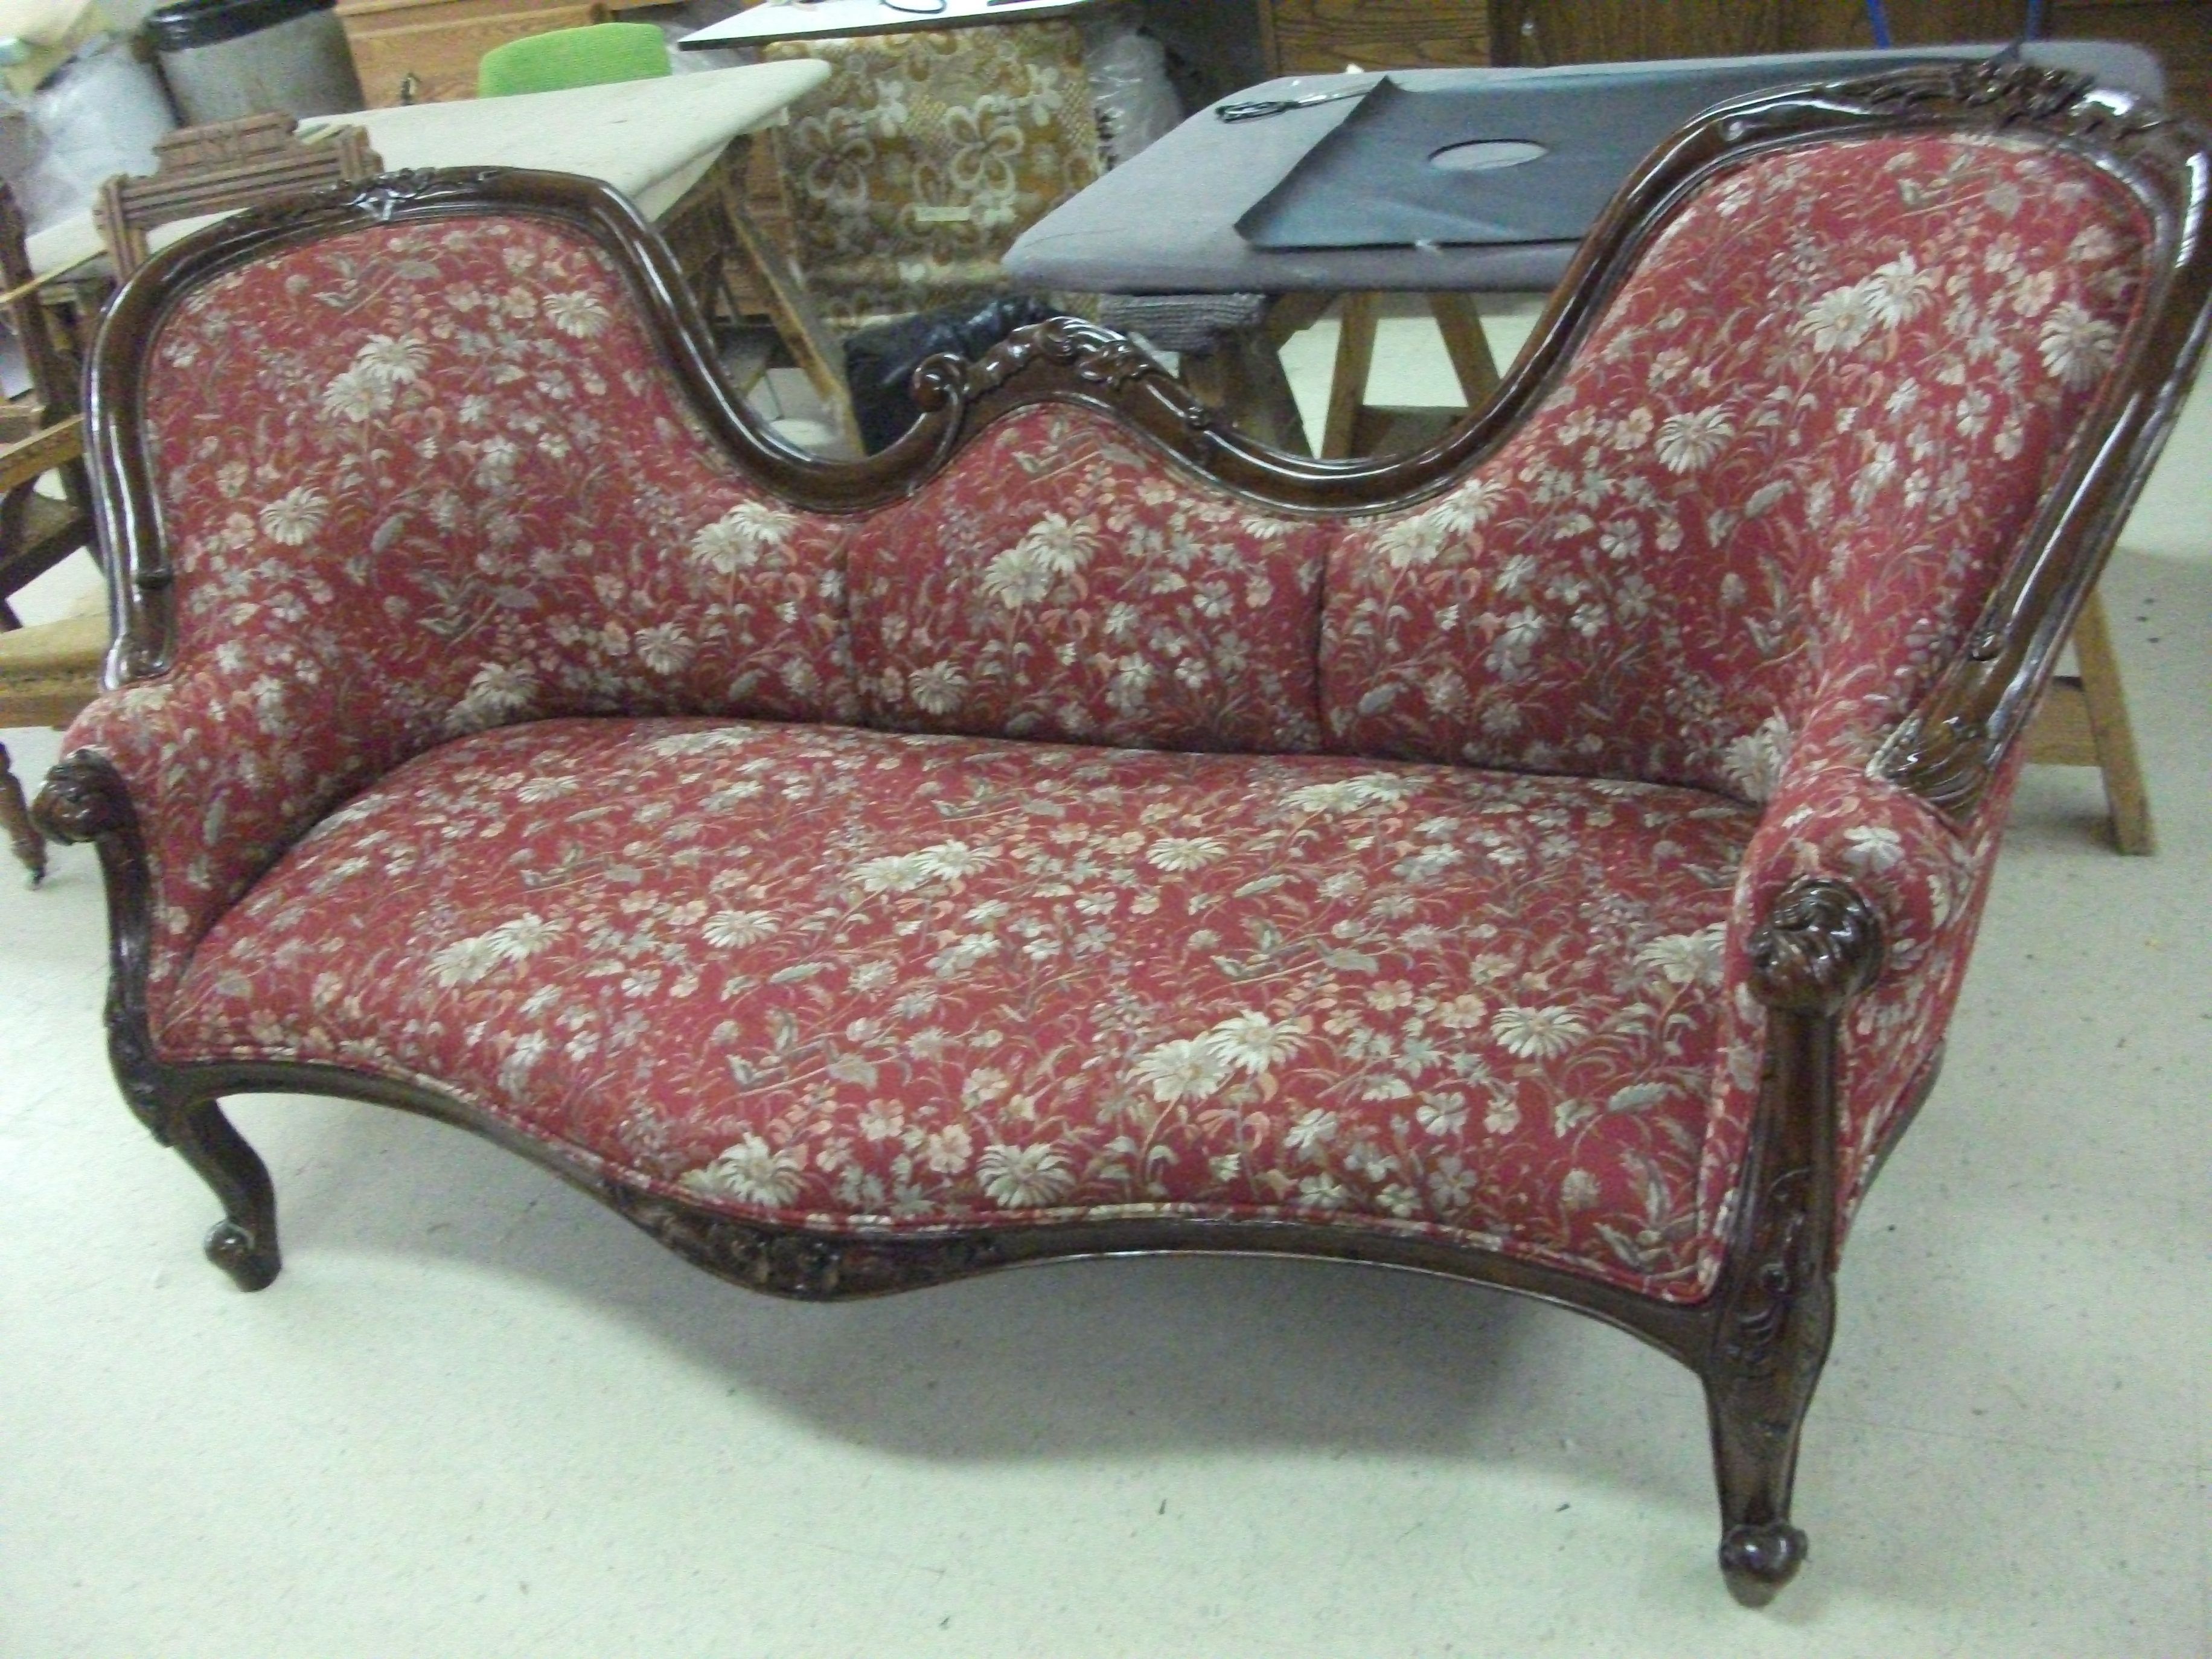 Restore Restores Your Antique Furniture or Any Upholstery.